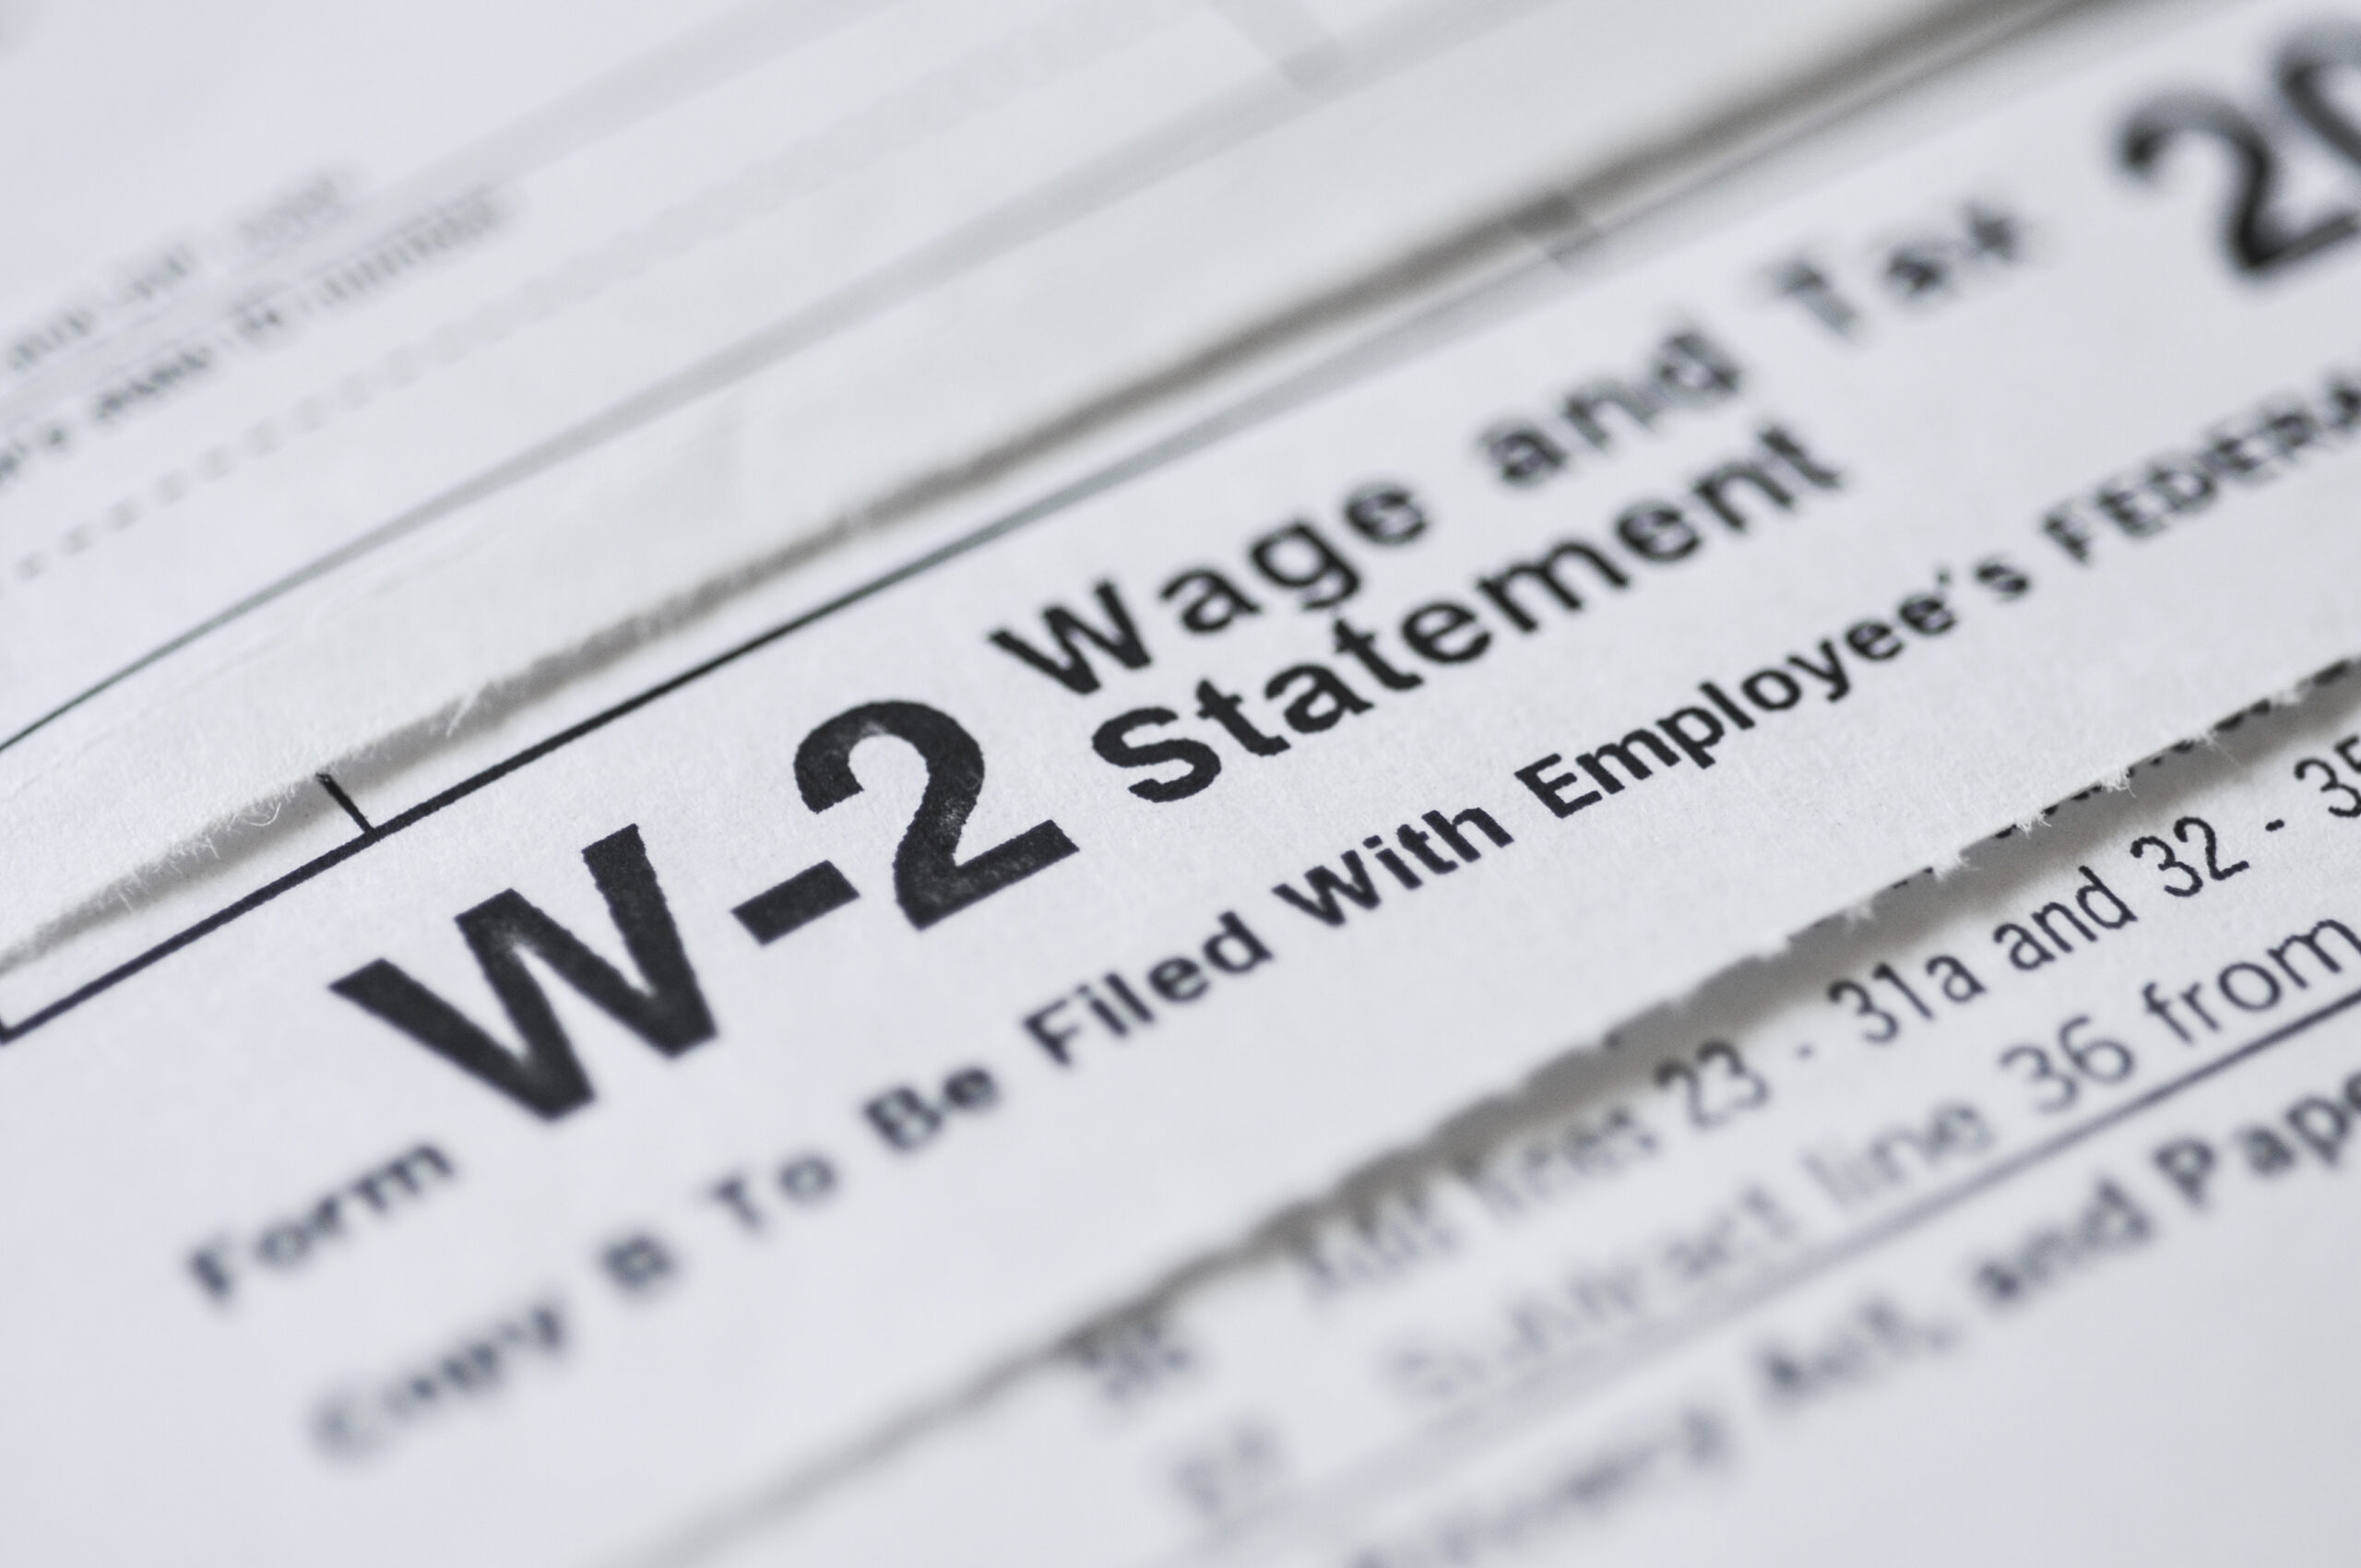 Lost W-2 Tax Form | Money with regard to How Do I Get A Lost W2 Form